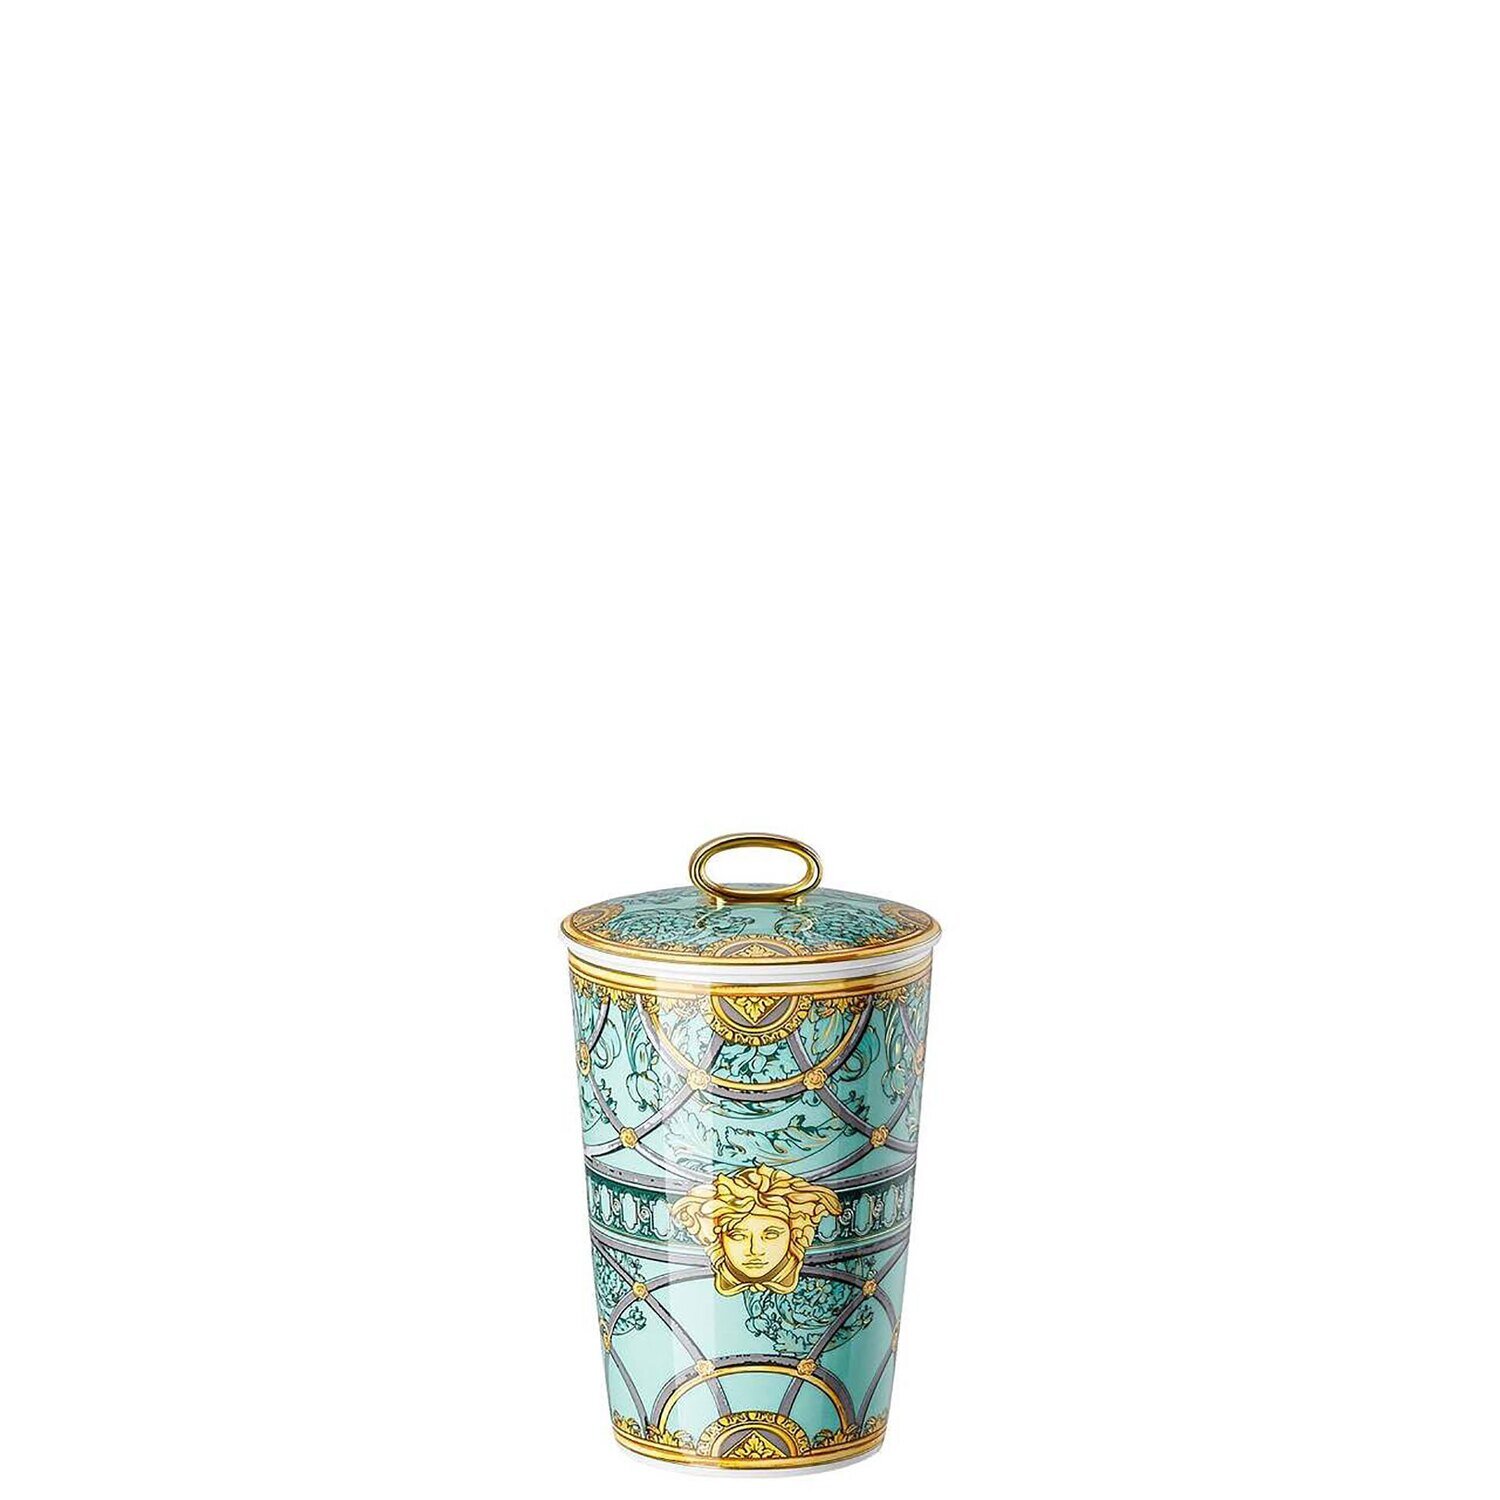 Versace Scala Palazzo Verde Scented Votive Candle with Lid 5 1/2 Inch